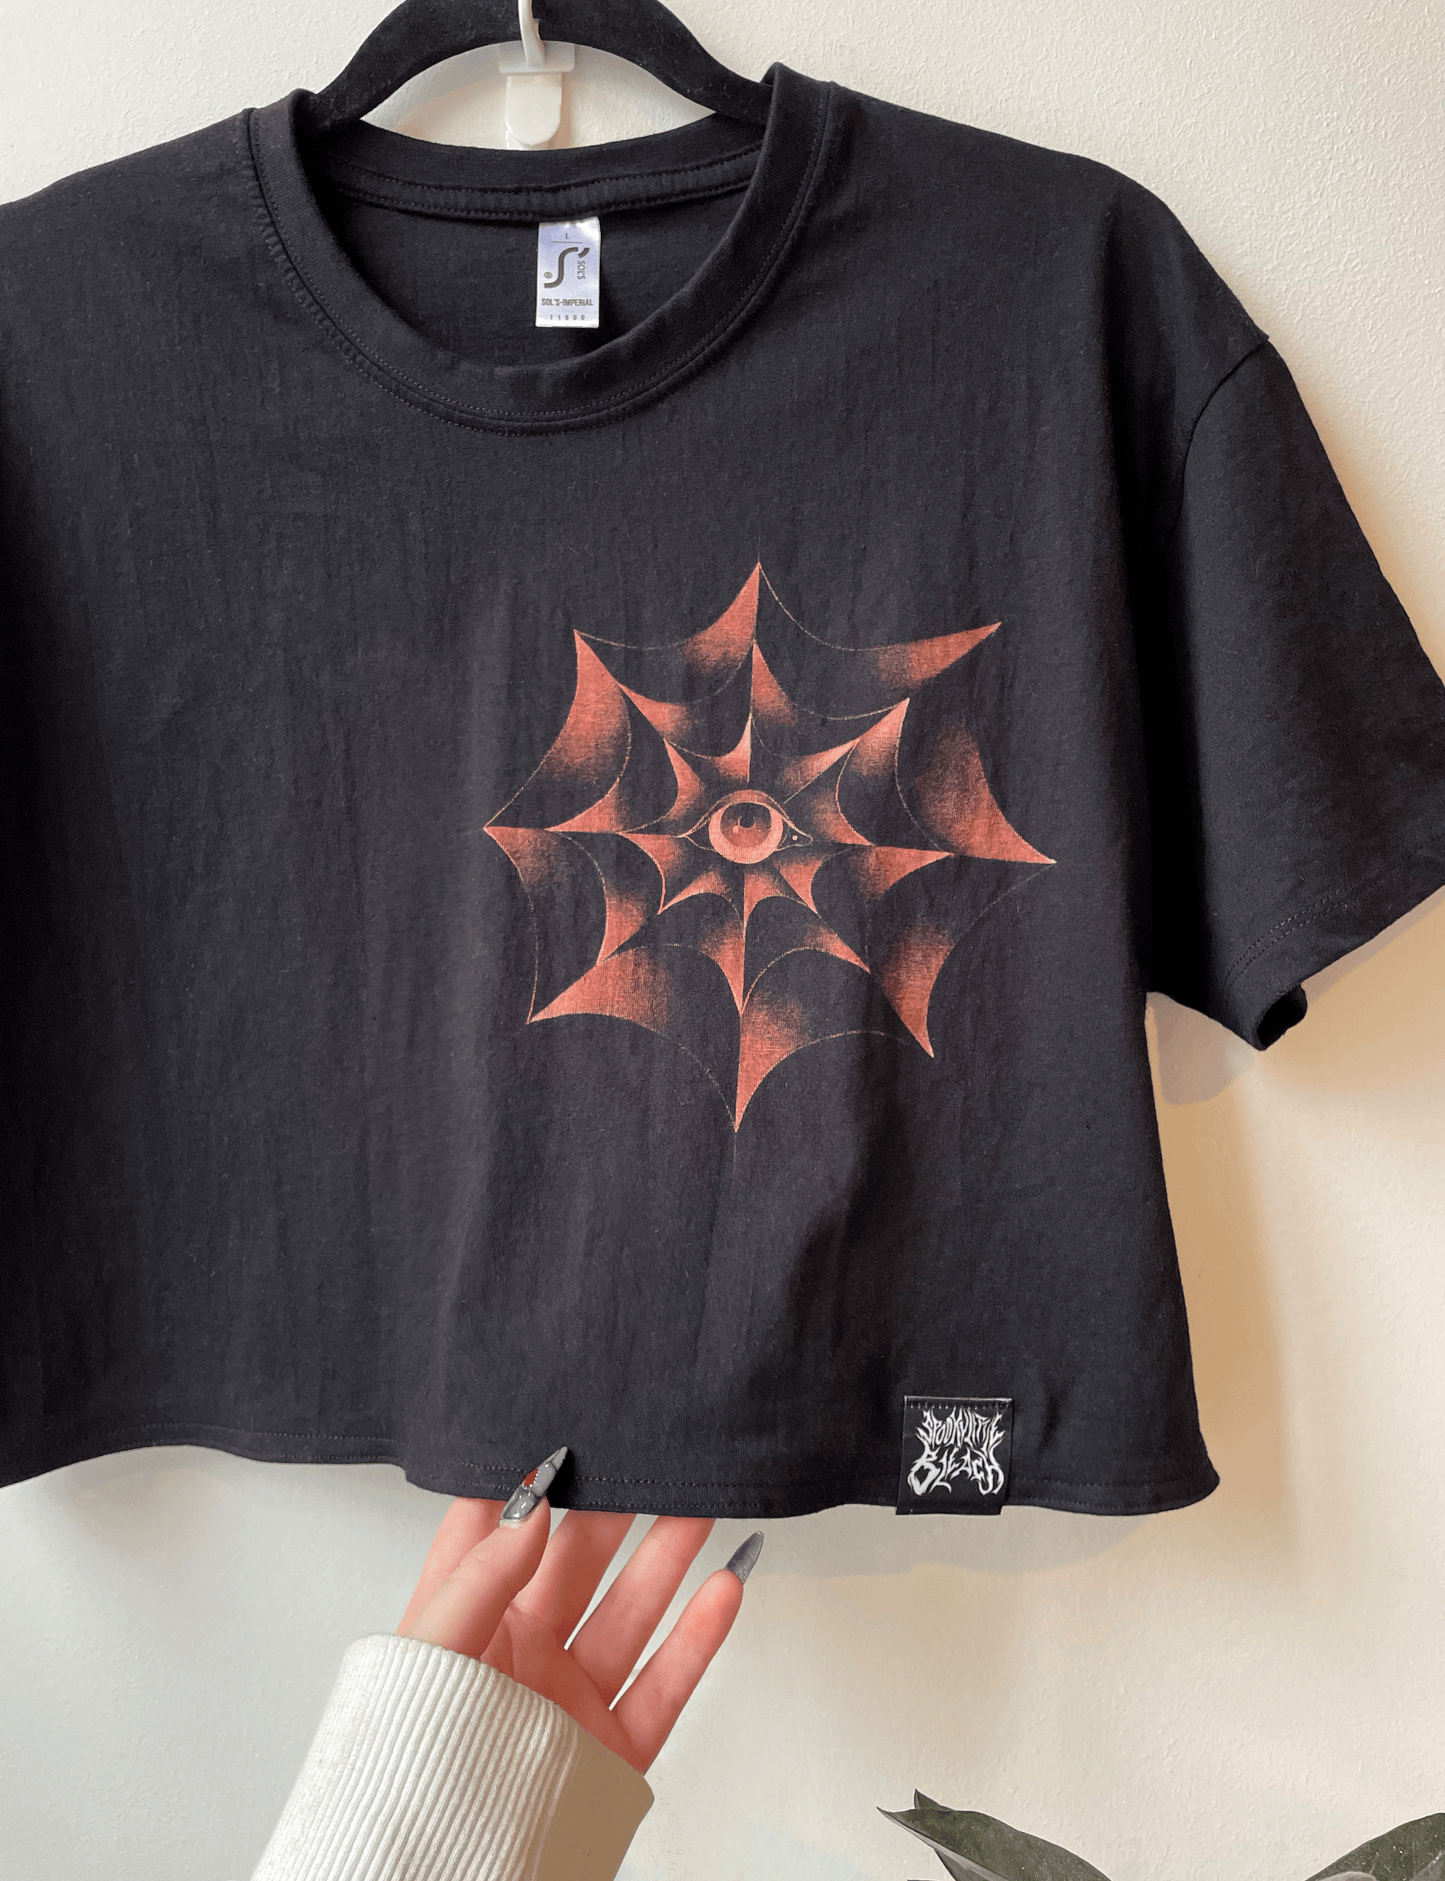 Web of Eyes crop top - One of a kind